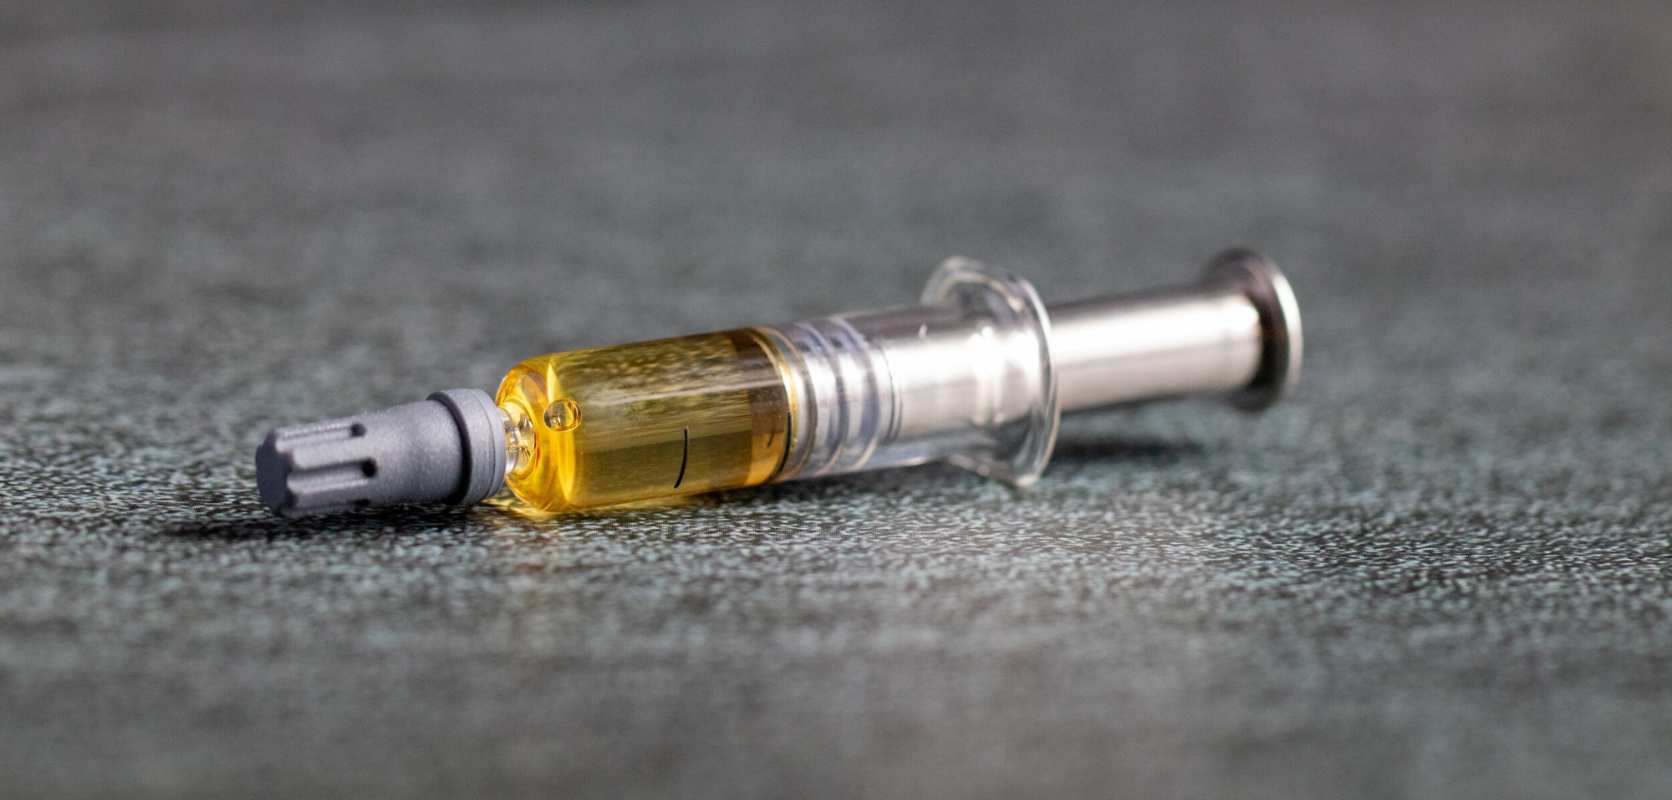 There are a few ways you can consume THC distillates. For instance, you can vaporize them, top off your joints or bowls and smoke them, use them as a suppository, or sublingually. 